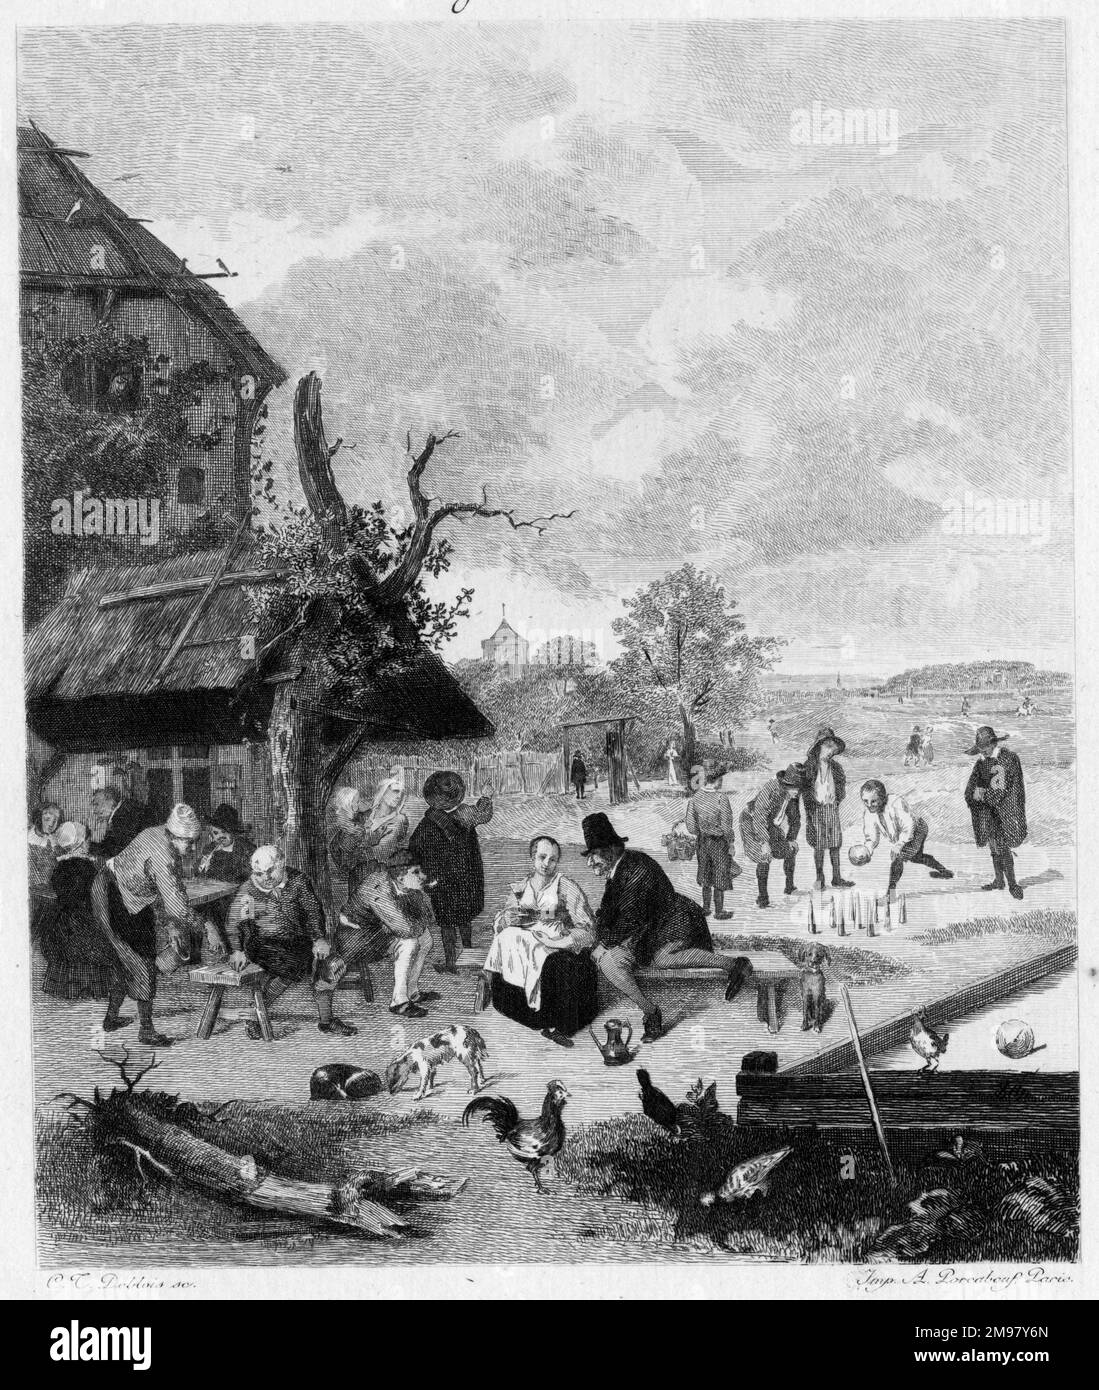 People playing skittles in the countryside. Stock Photo